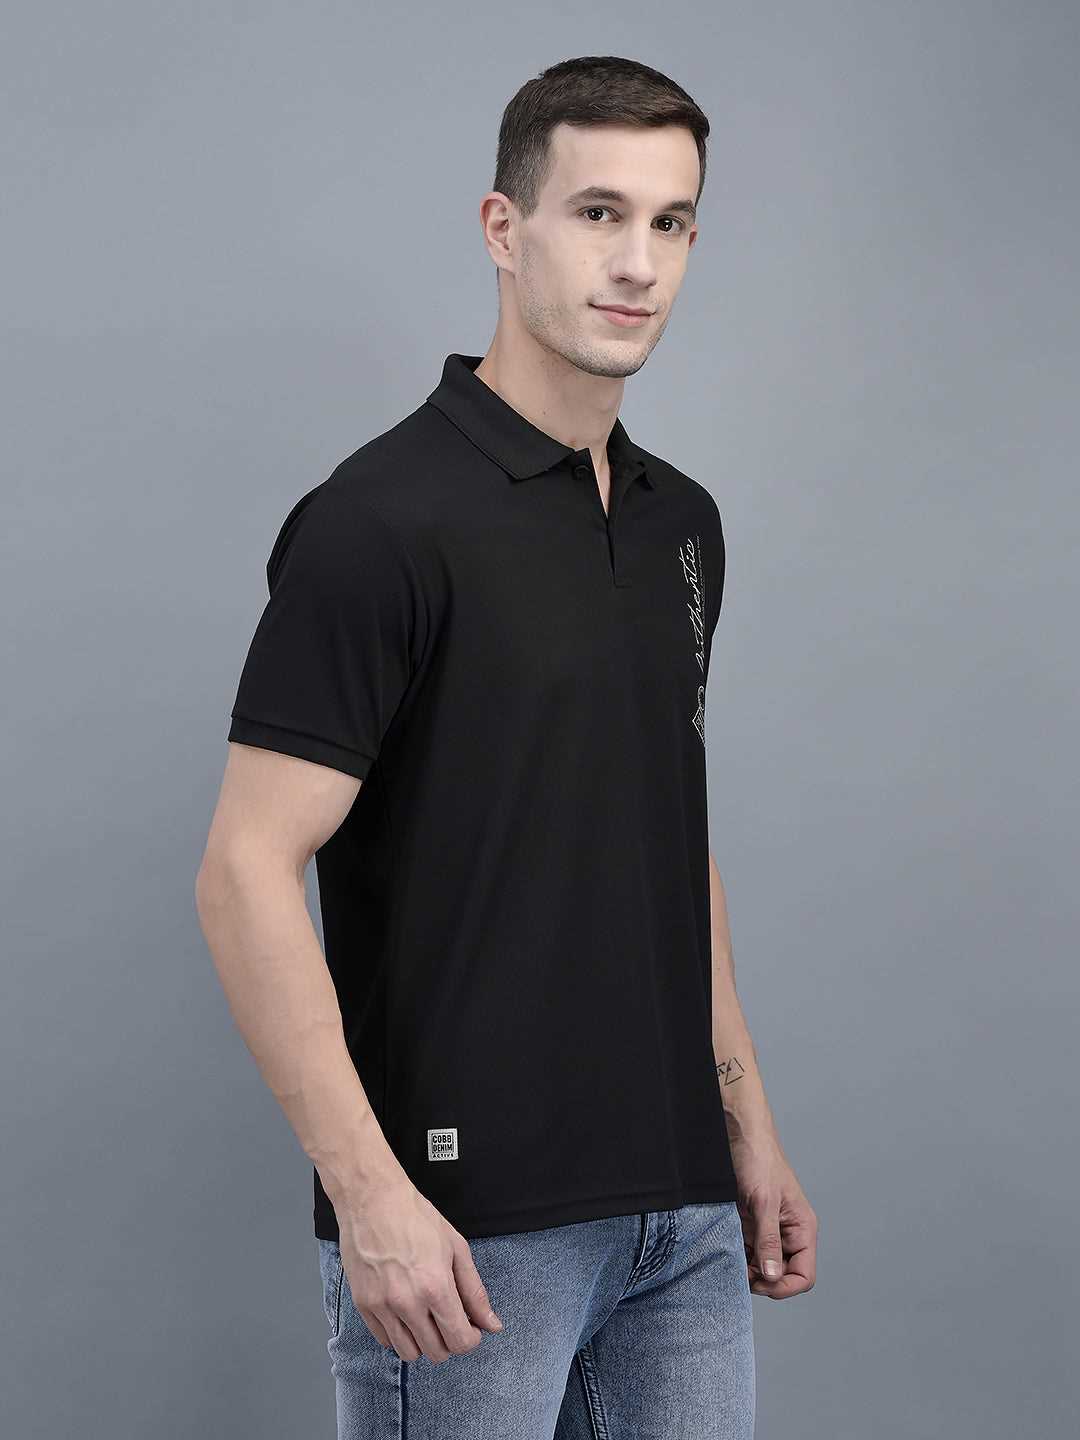 Elevate your Style with the Cobb Black Solid Polo Neck T-Shirt